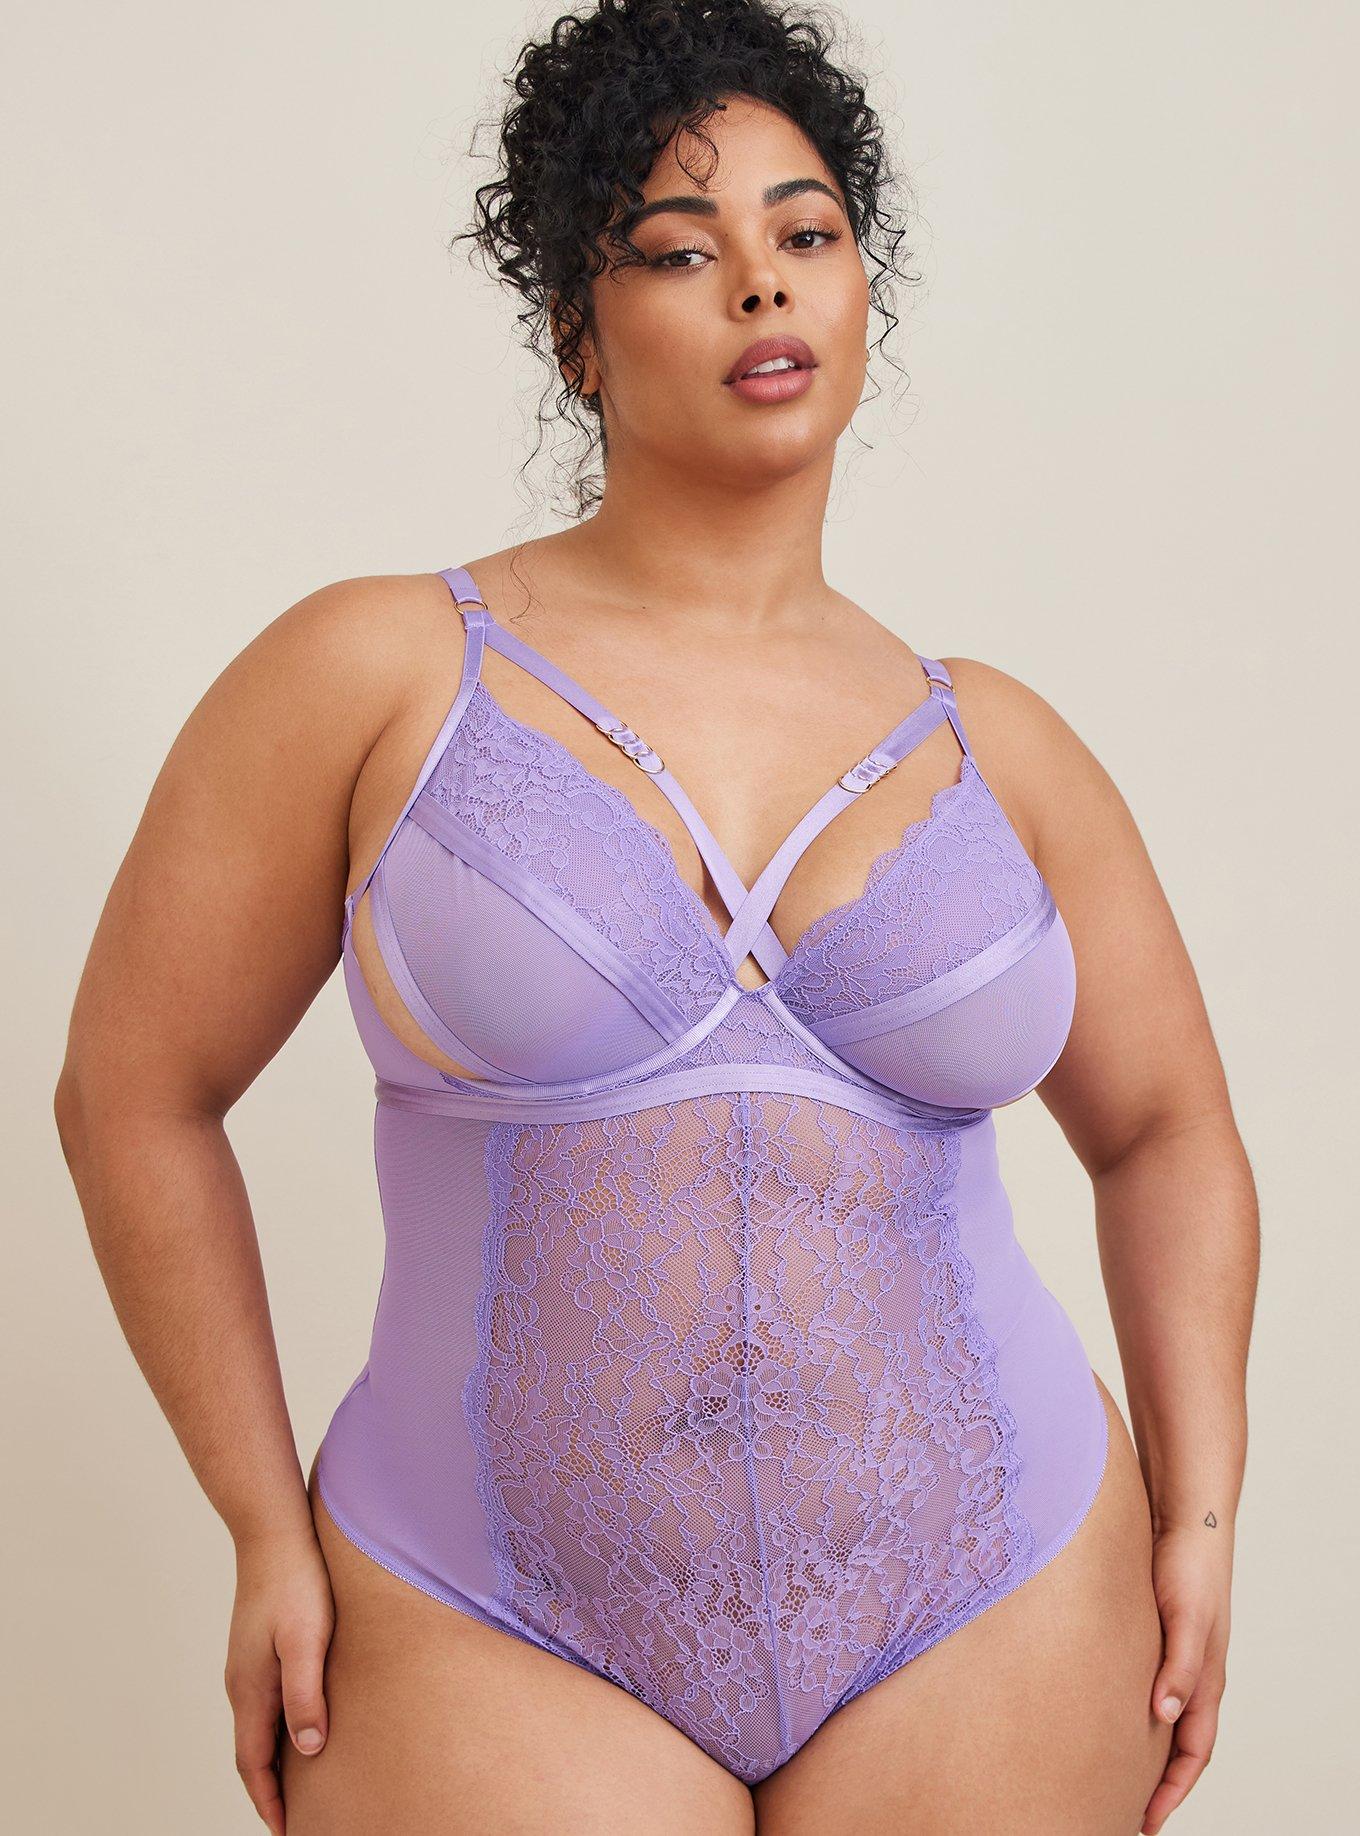 Torrid's New Sizes Are Larger, Plus A Size 6